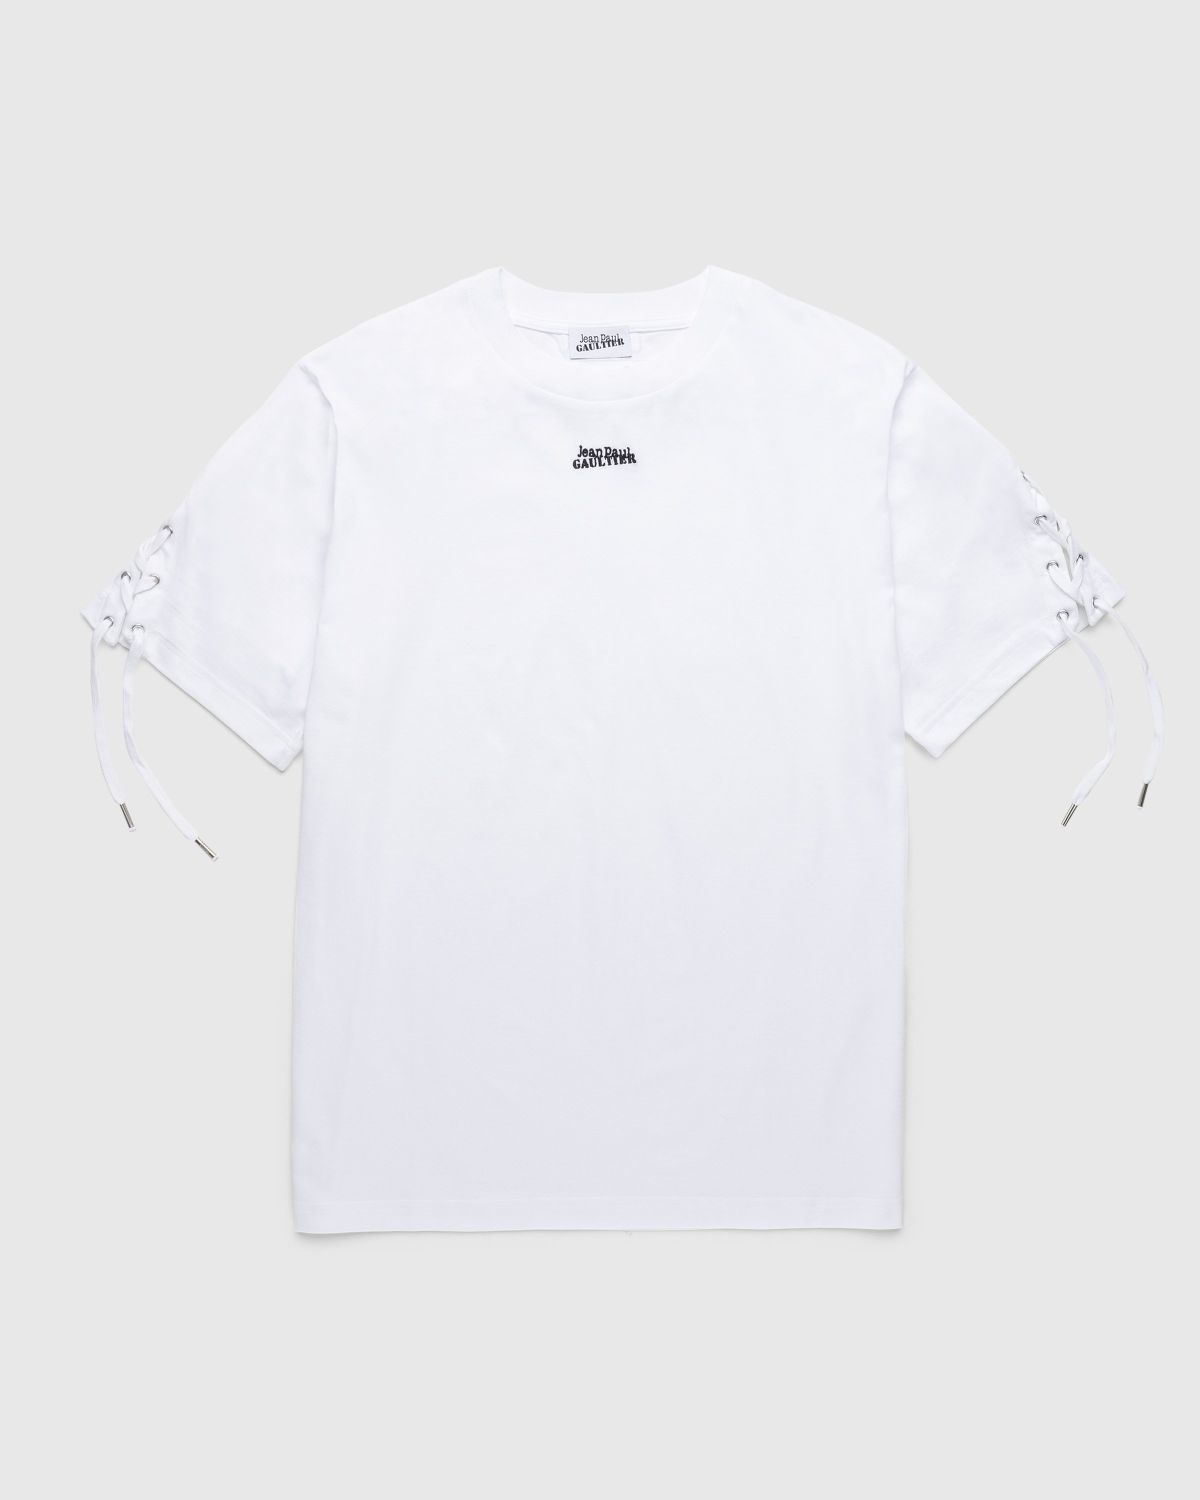 Jean Paul Gaultier – Oversize Laced Tee-Shirt White - 1